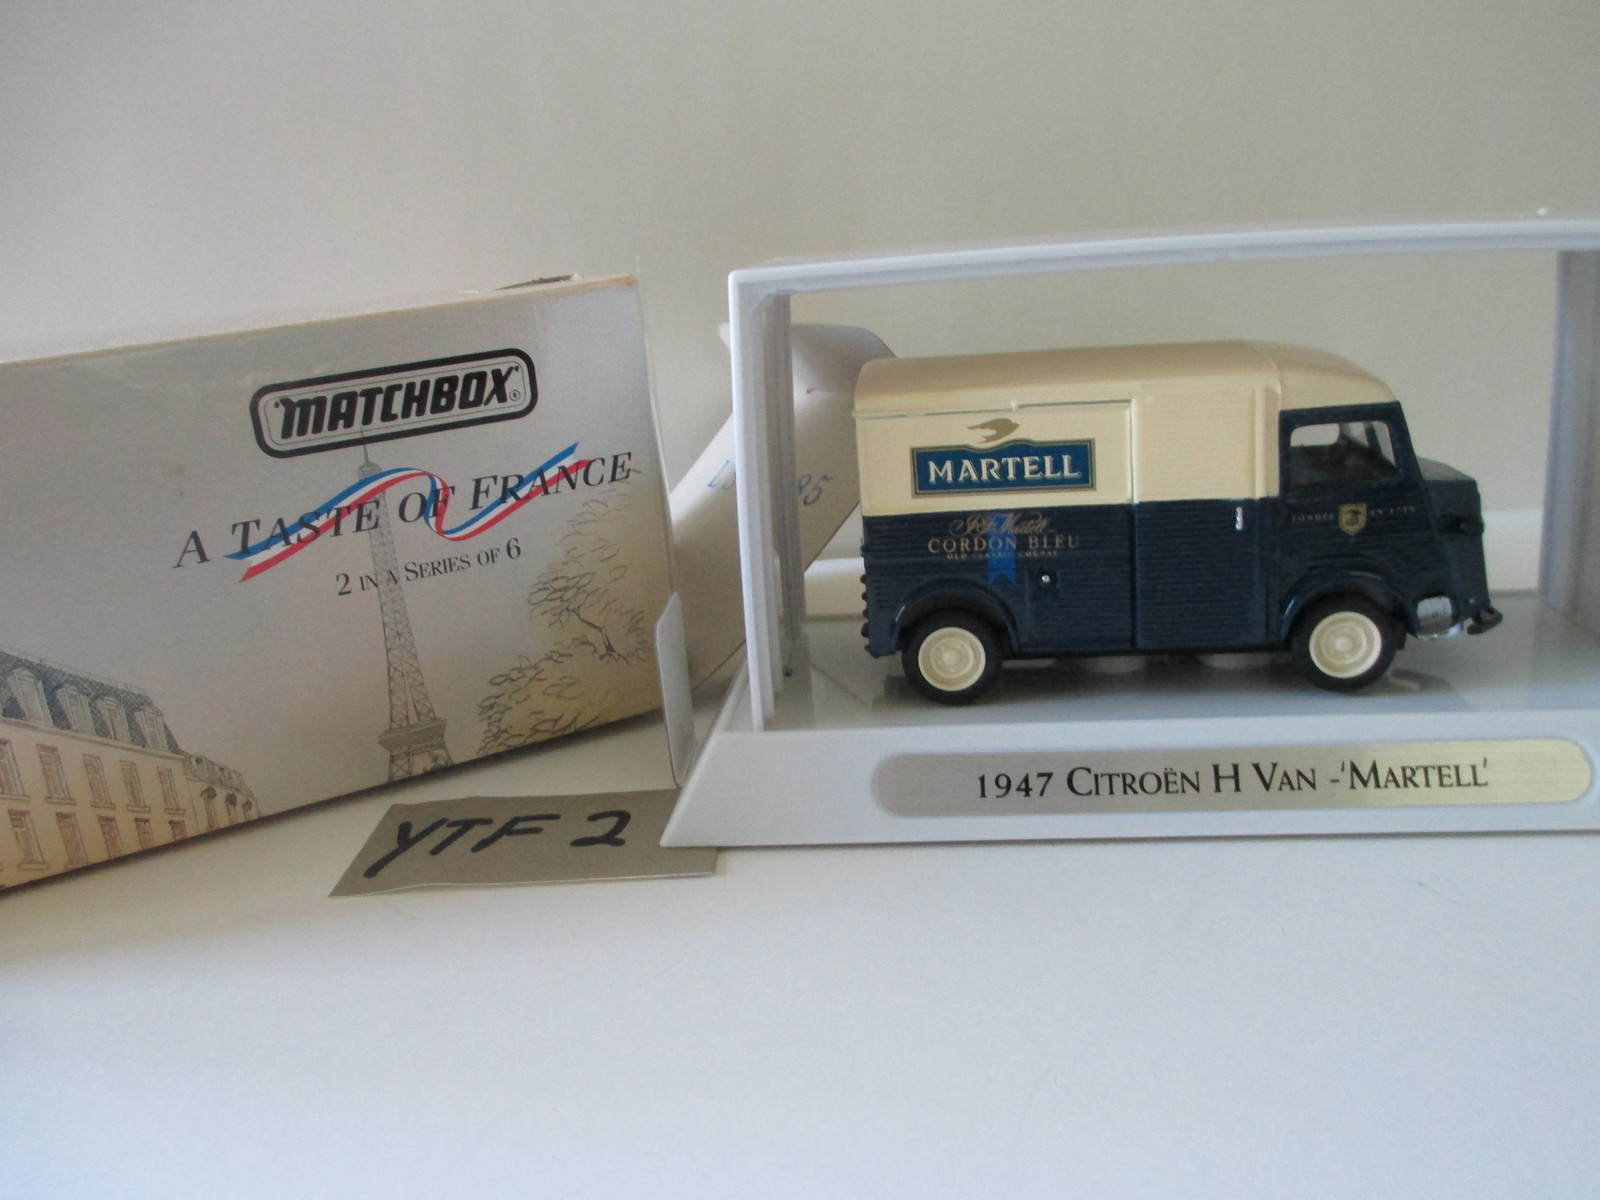 Primary image for Matchbox Models of Yesteryear 1947 Citroen H Van-Martell YTF-2 A Touch of France